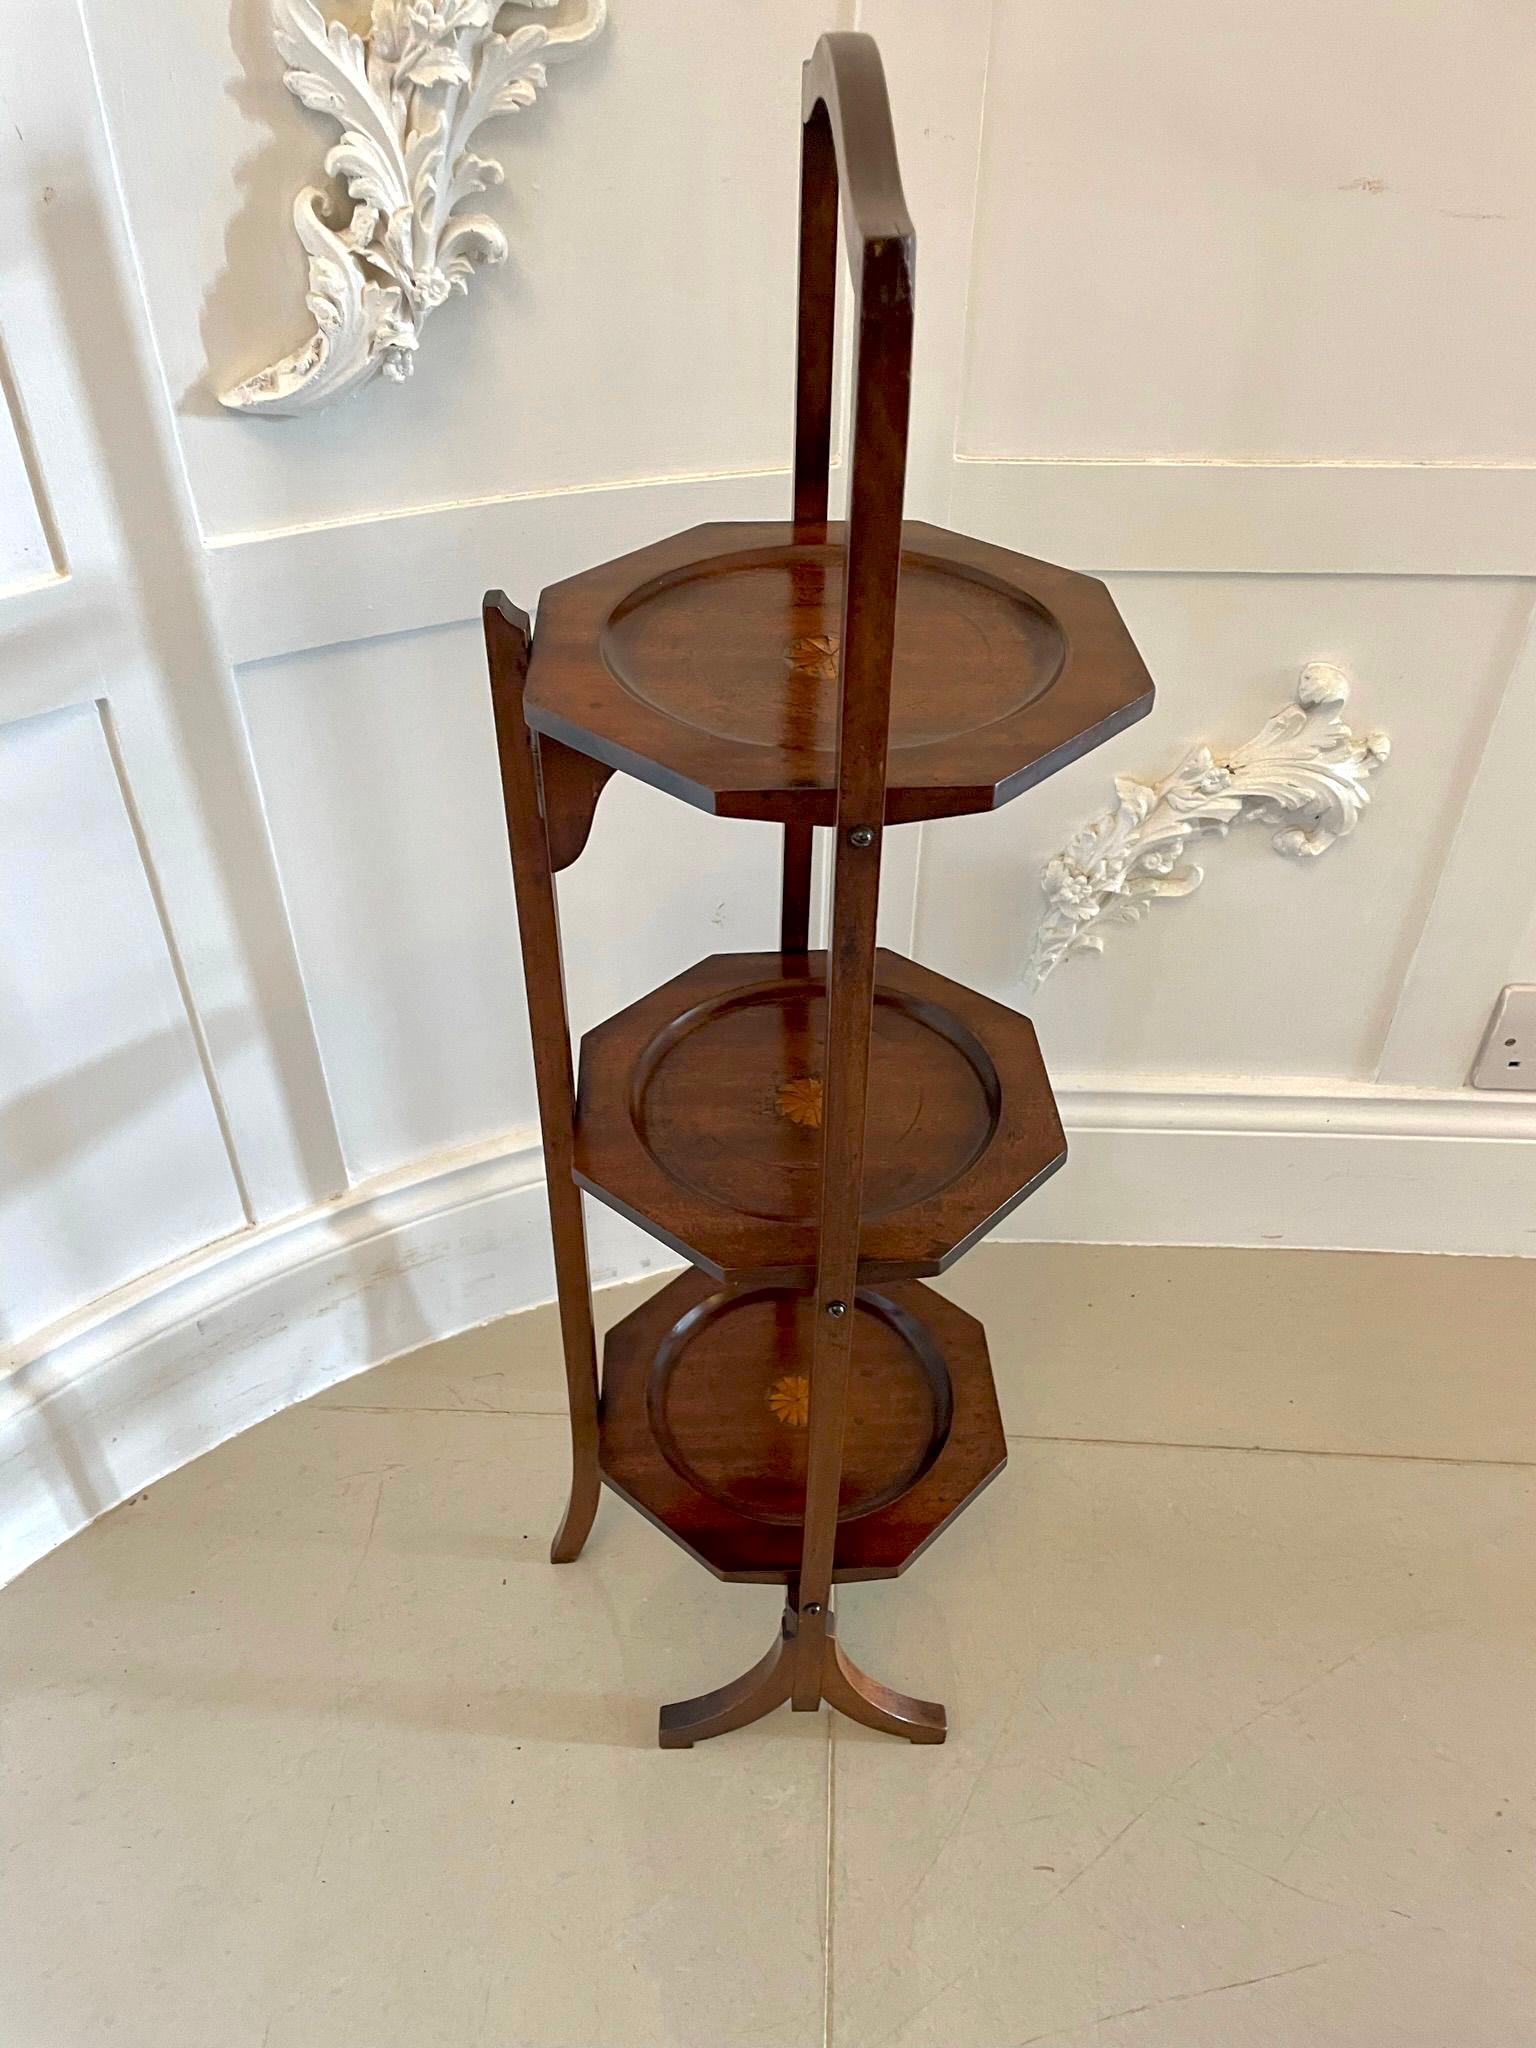 Antique Edwardian Inlaid Mahogany 3 Tier Cake Stand In Good Condition For Sale In Suffolk, GB